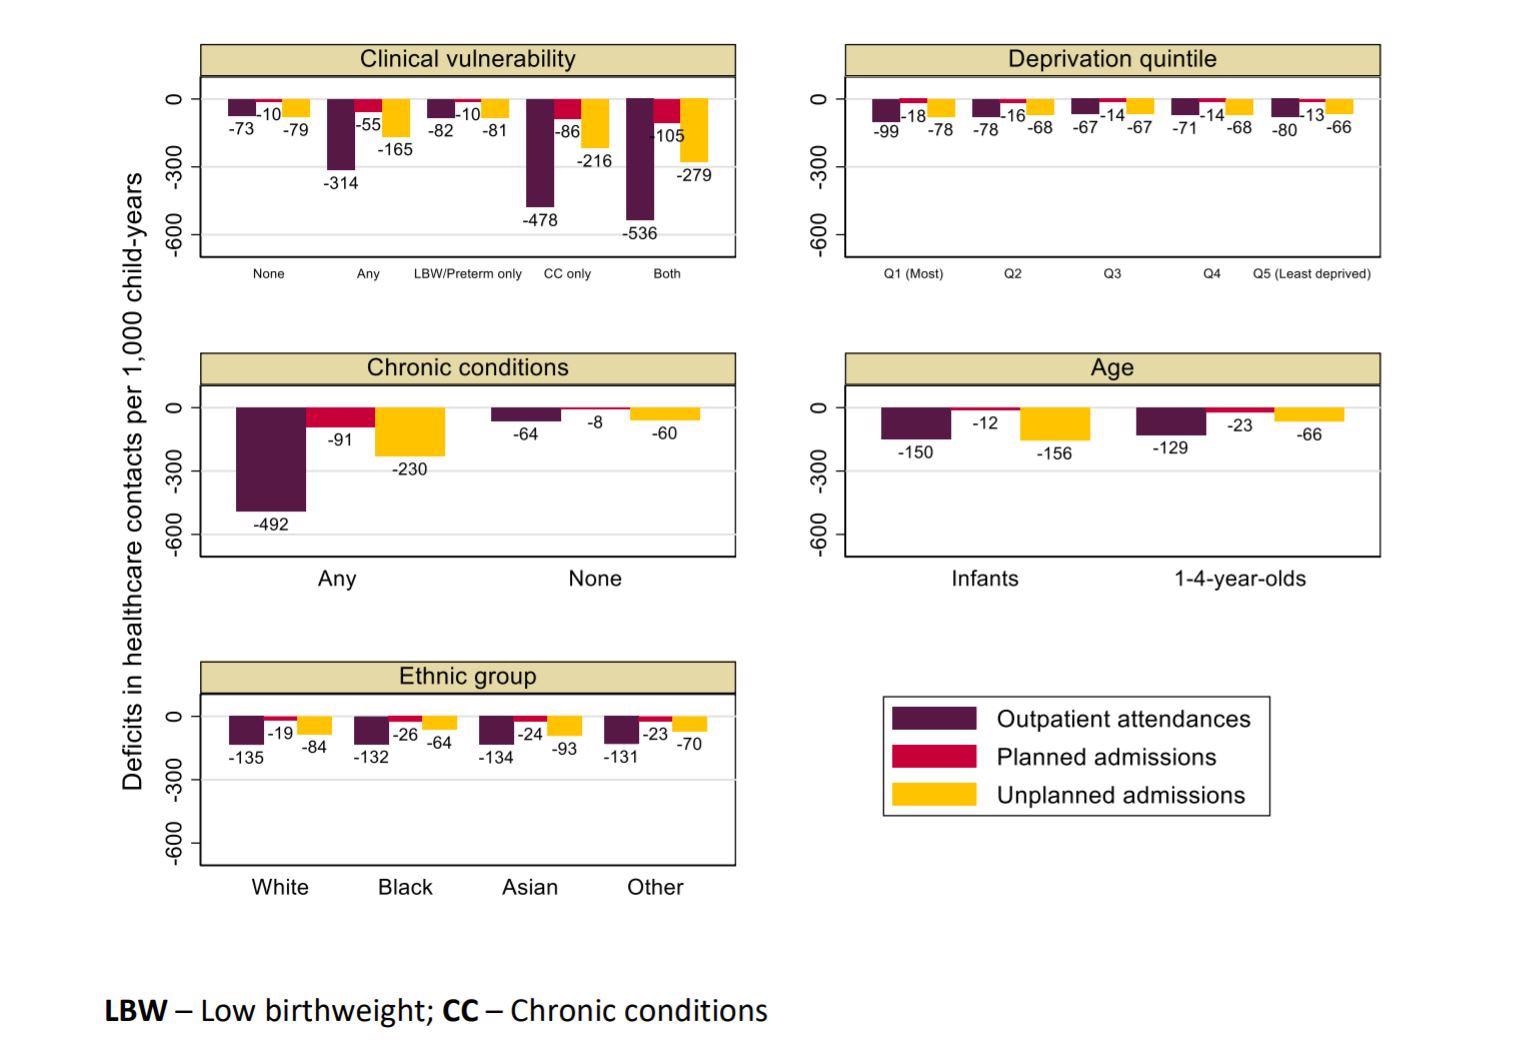 Deficit in care during the pandemic (March 2020-2021), estimated from predicted minus observed rates of hospital contacts per 1,000 child-years for children aged 0 to 4 years, by clinical vulnerability status and risk factors